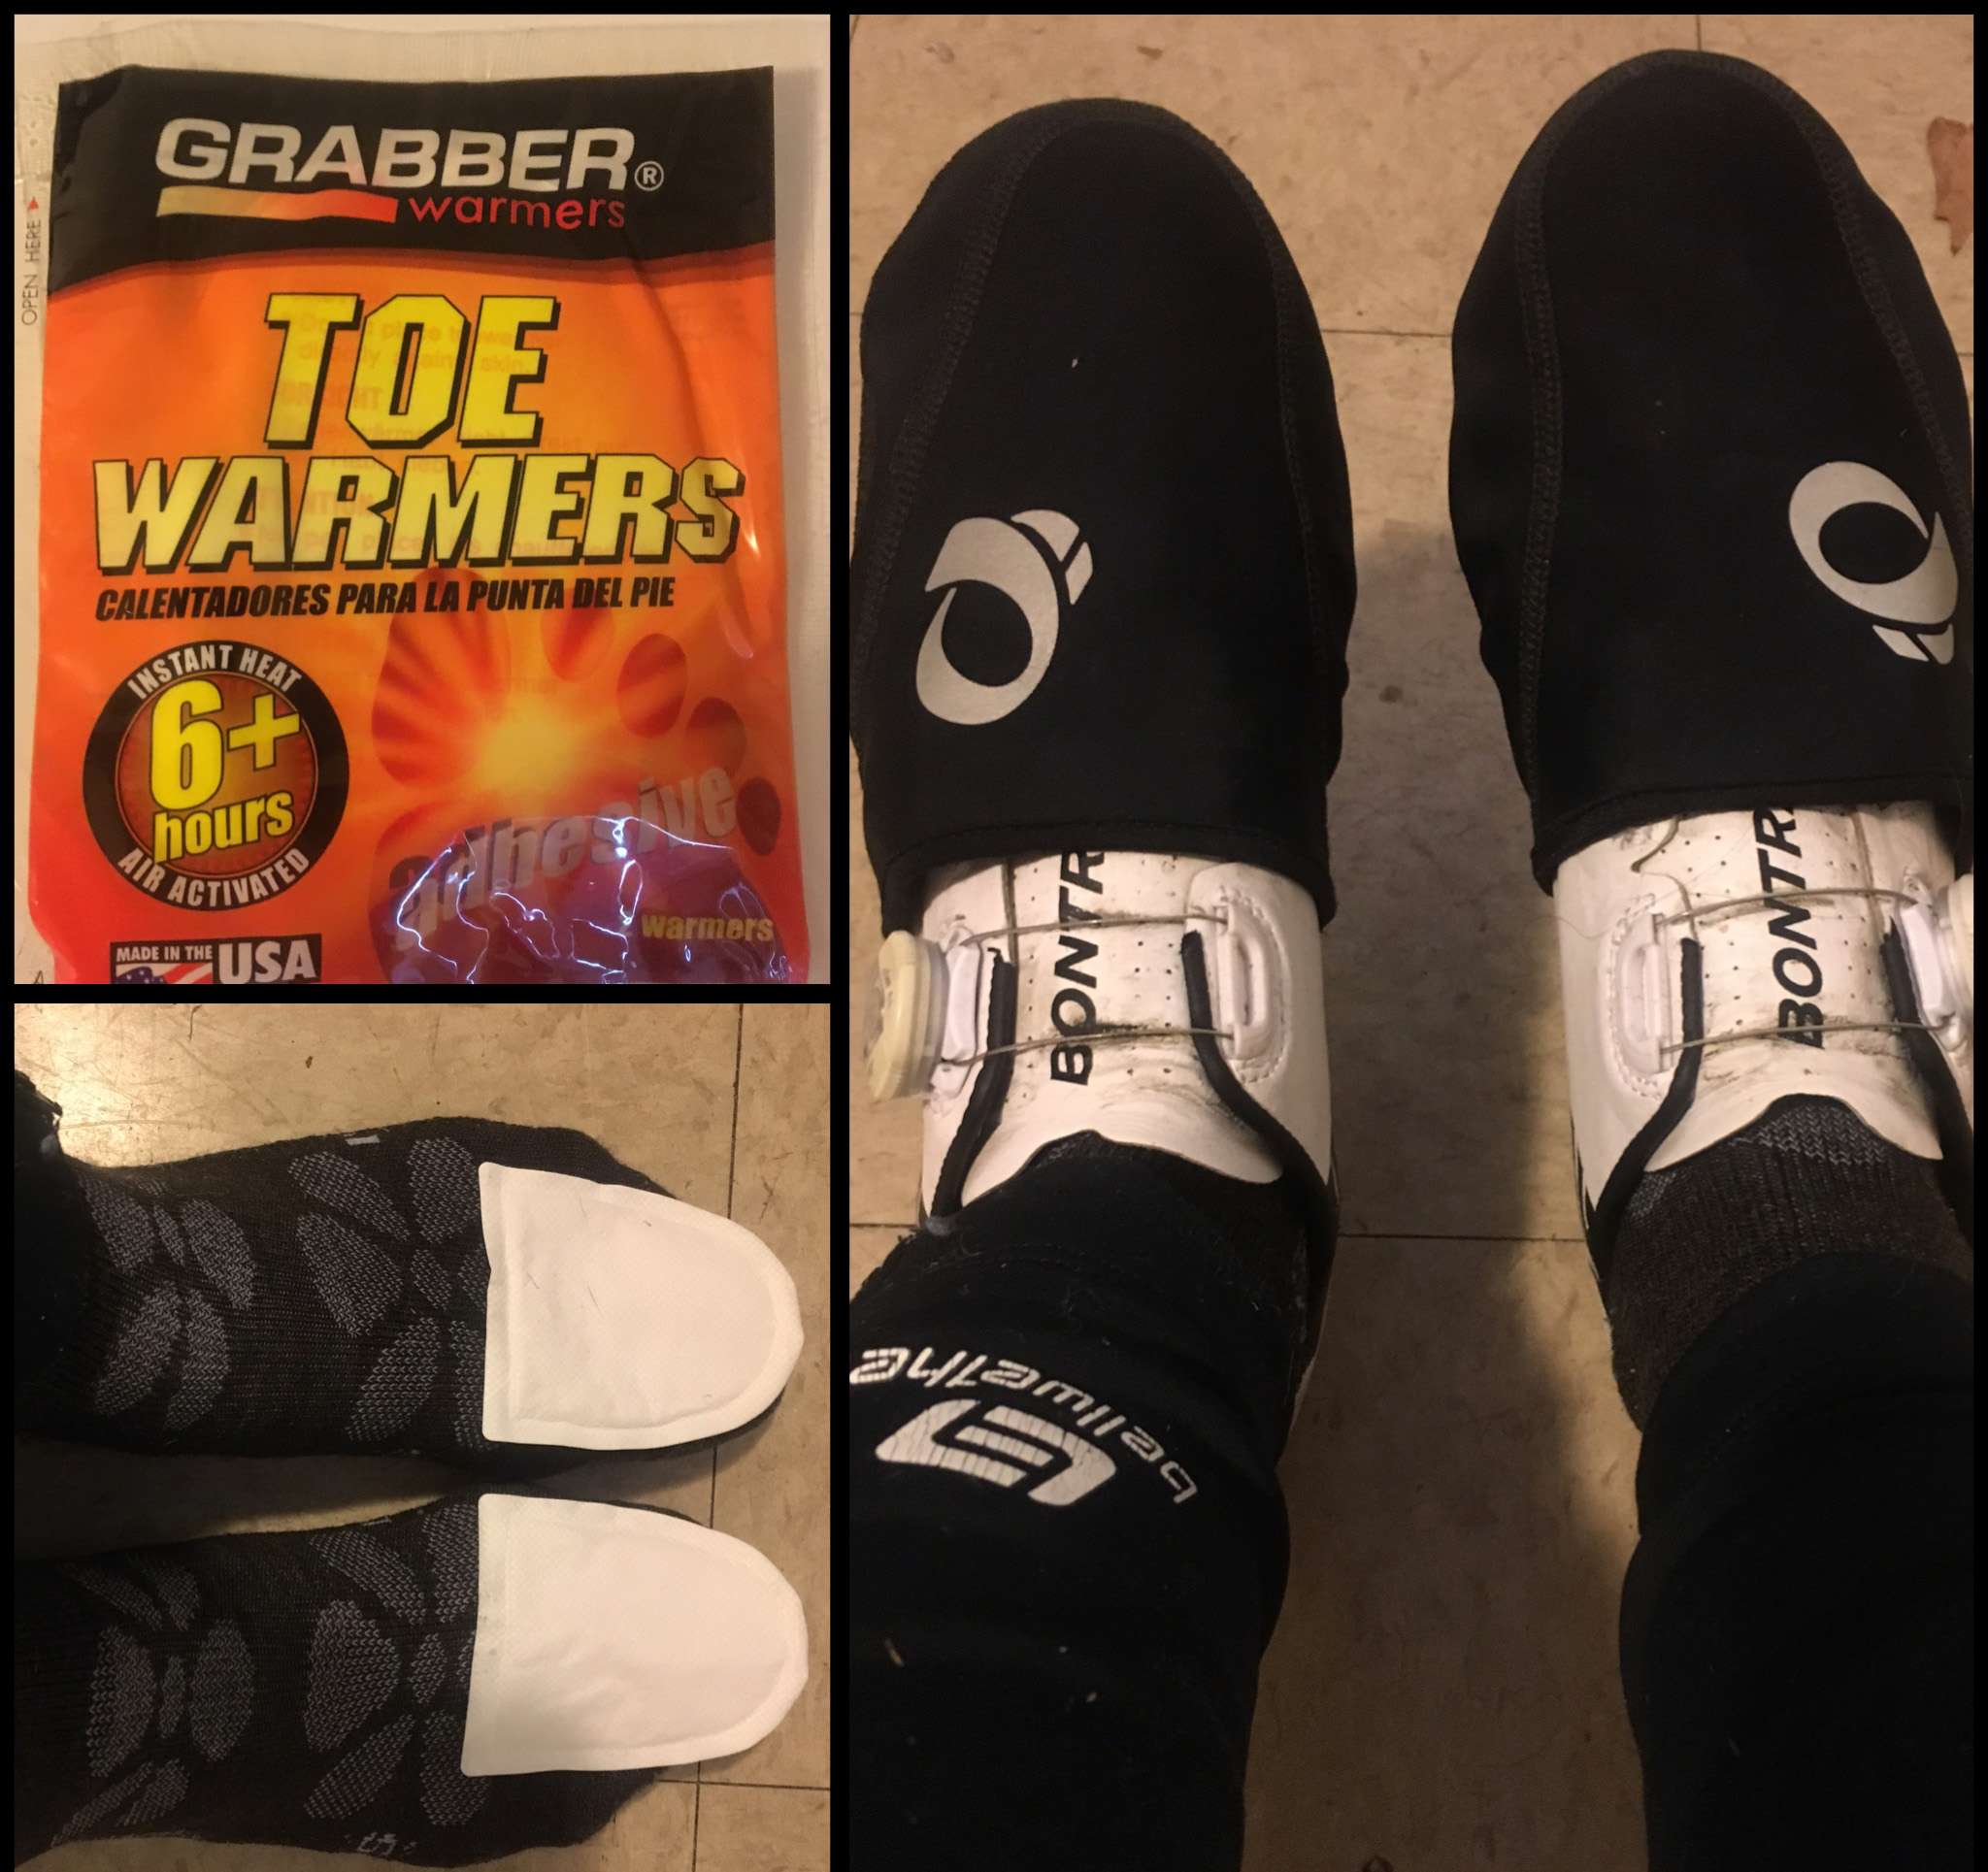 Toe covers and toe warmers are inexpensive ways to help keep your feet warm.